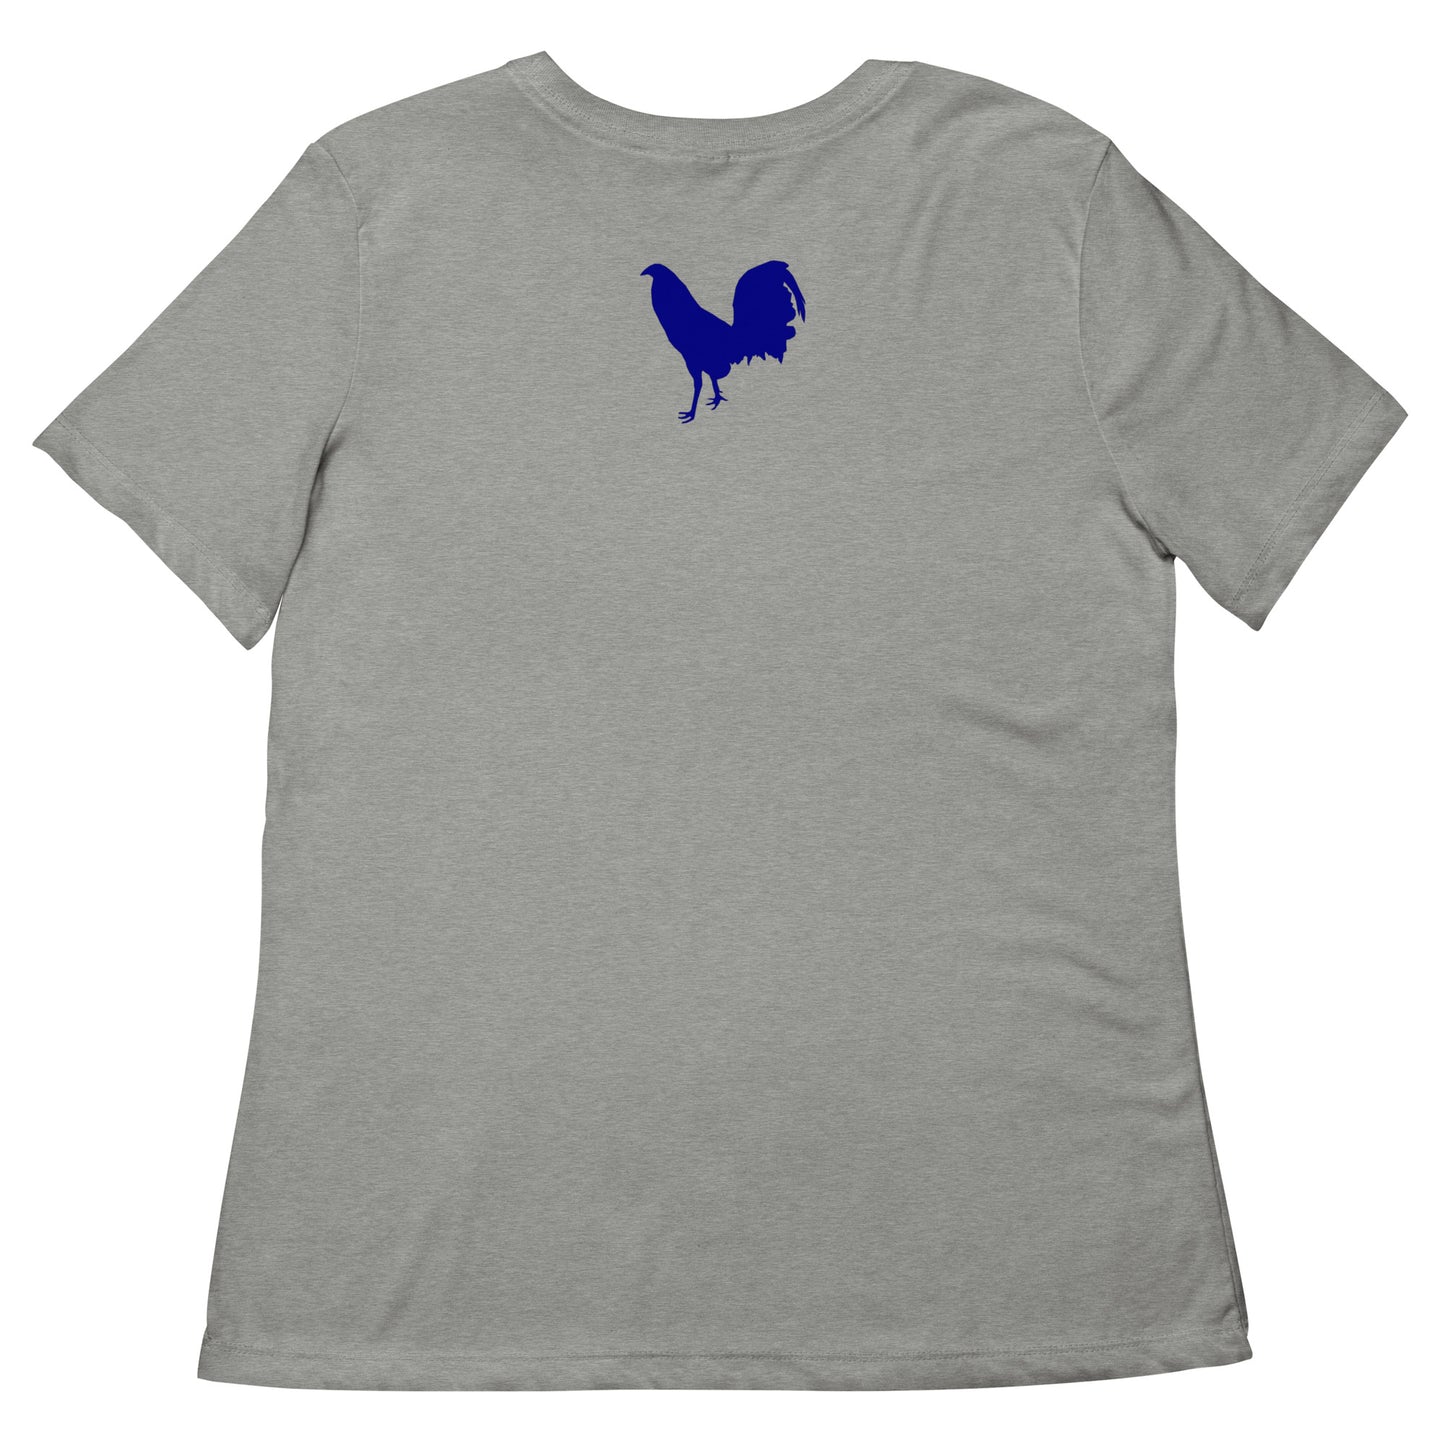 Women’s F FOWL MOUTH Gamefowl Rooster T-shirt